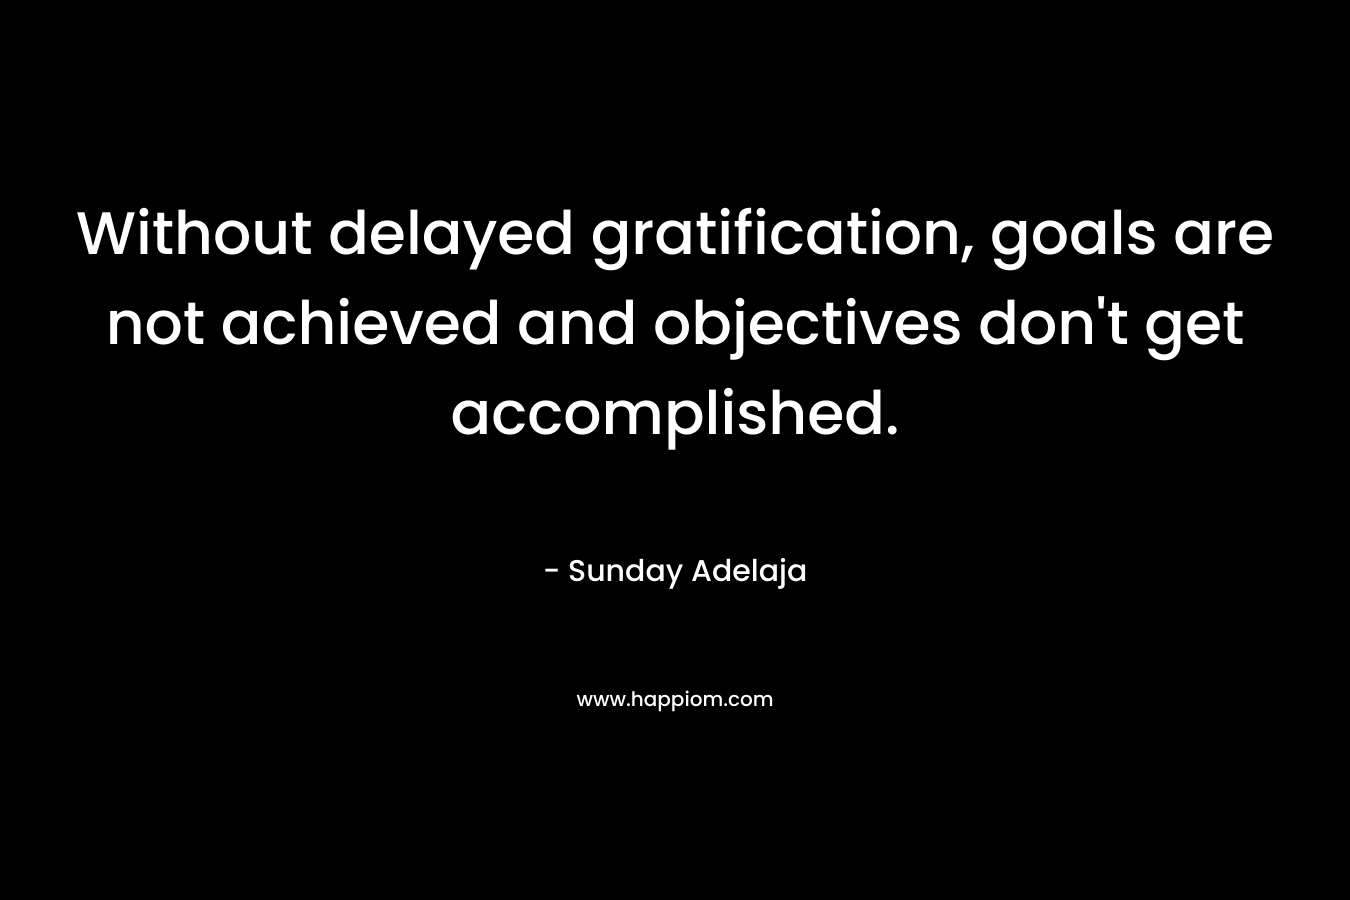 Without delayed gratification, goals are not achieved and objectives don’t get accomplished. – Sunday Adelaja